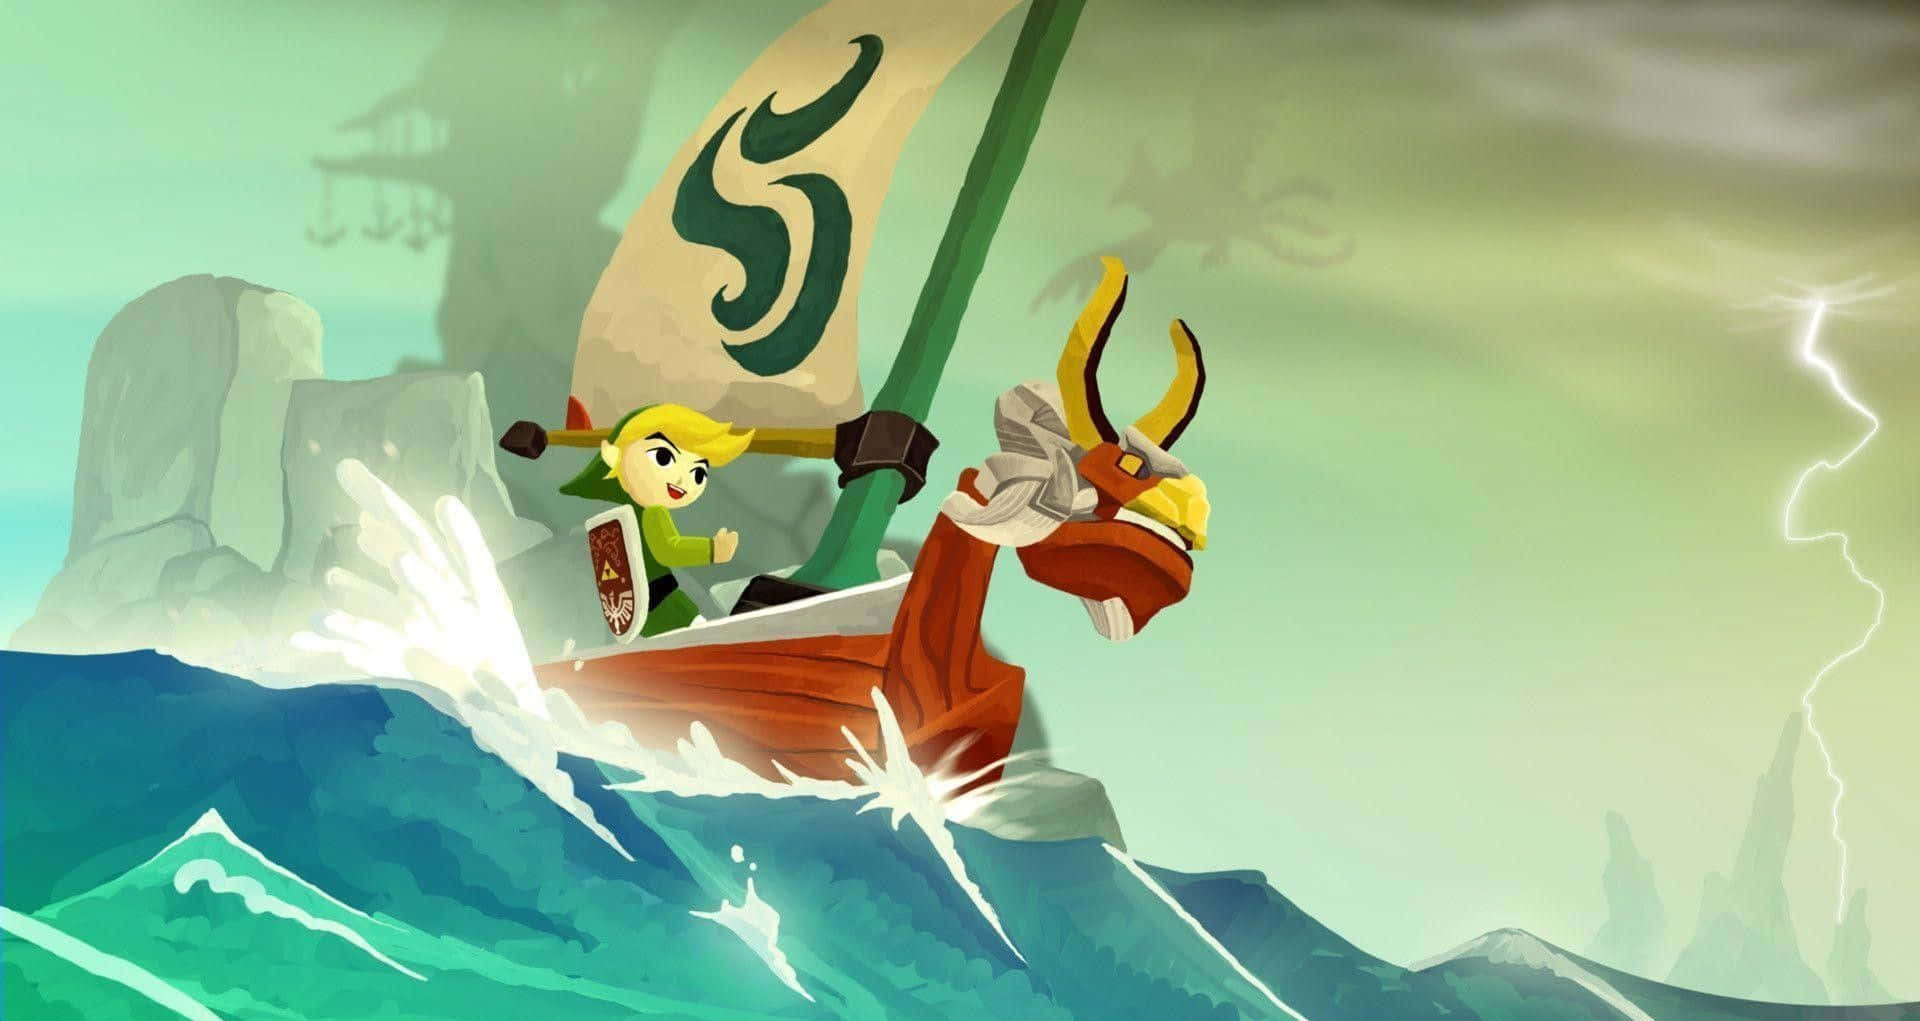 Link and The King of Red Lions sail through the Great Sea in The Legend of Zelda: The Wind Waker Wallpaper